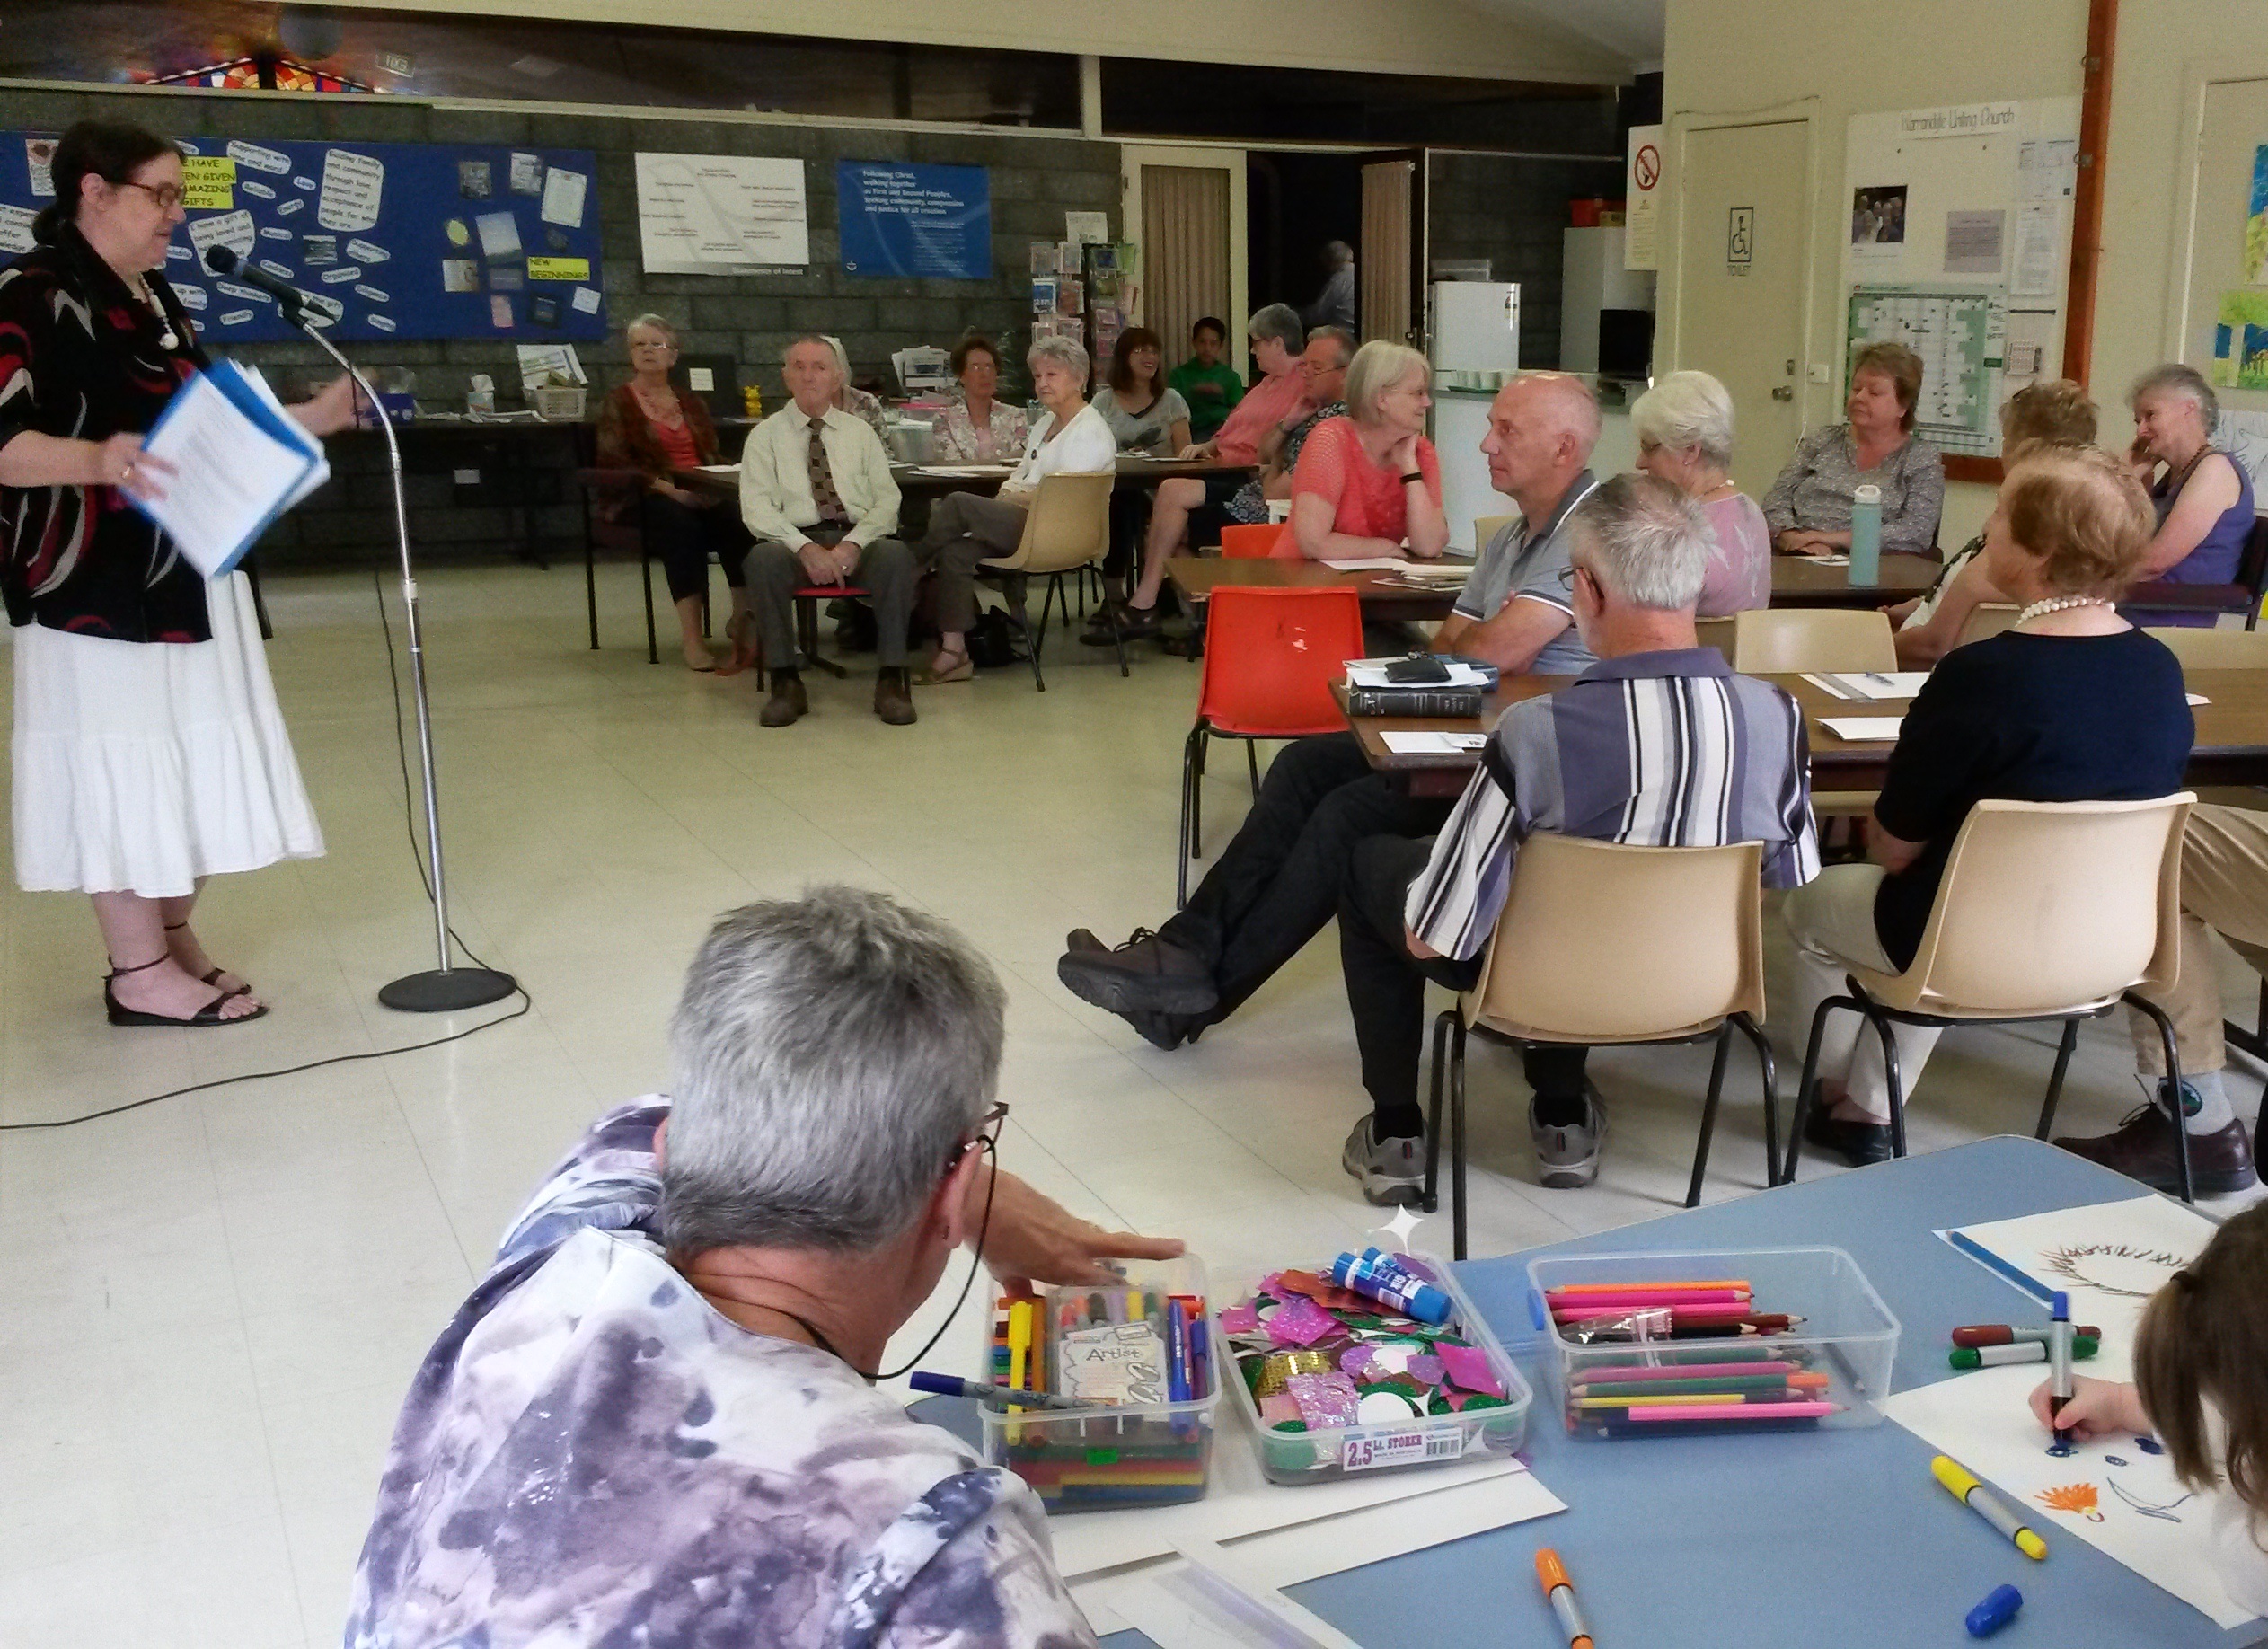 Warrandyte Uniting Church held a Vision exploring day in early 2017